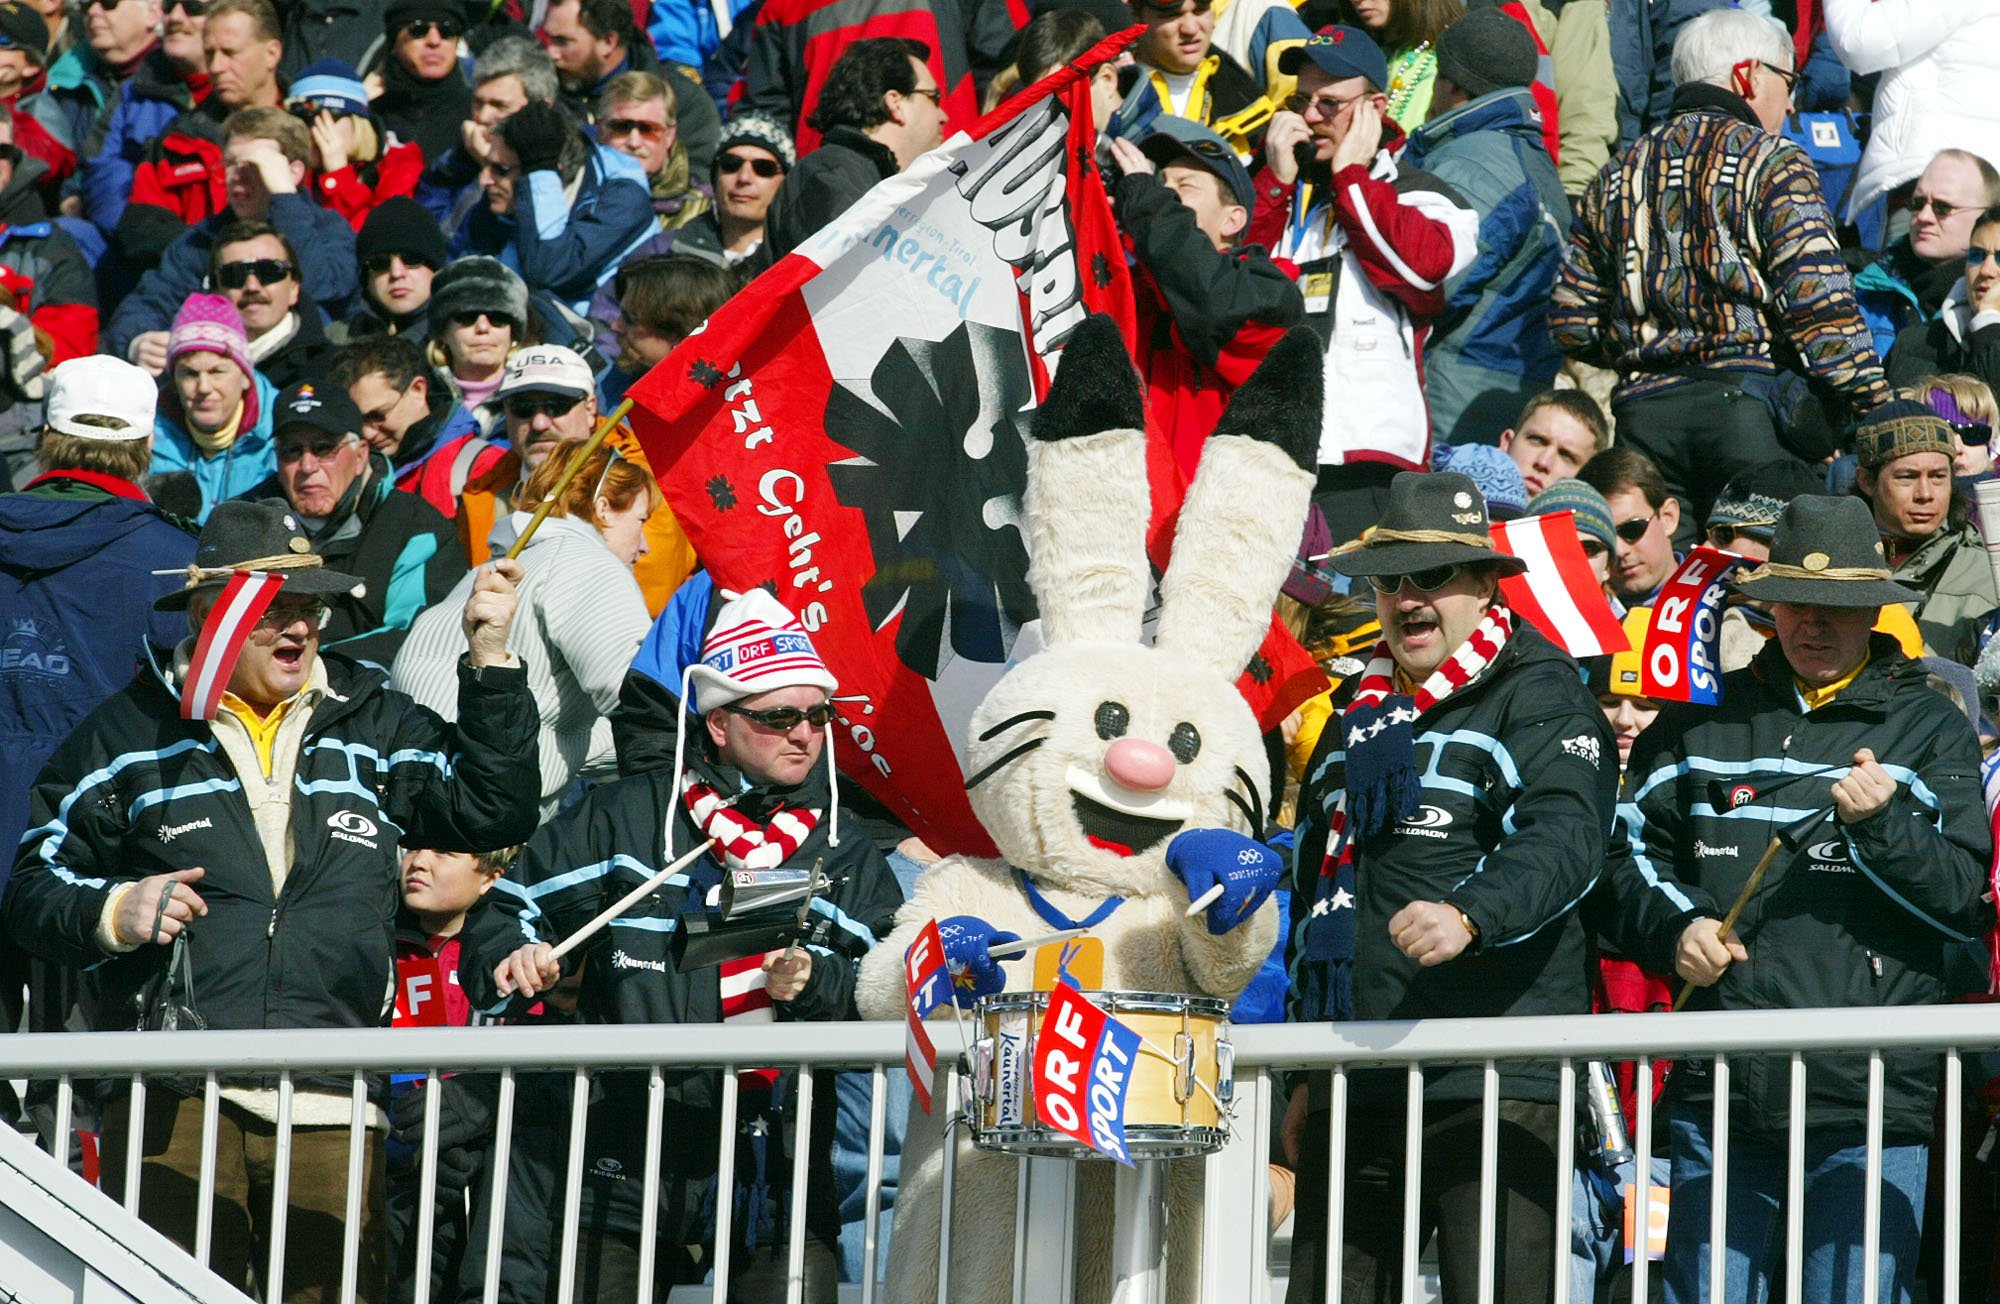  Supporters of the Austrian ski team make music with Powder one of the Salt Lake City Winter Olympic Games mascots as they wait for the start of the weather delayed women's downhill in Snowbasin, Utah on Feb. 11, 2002. (AP Photo/Rudi Blaha) 